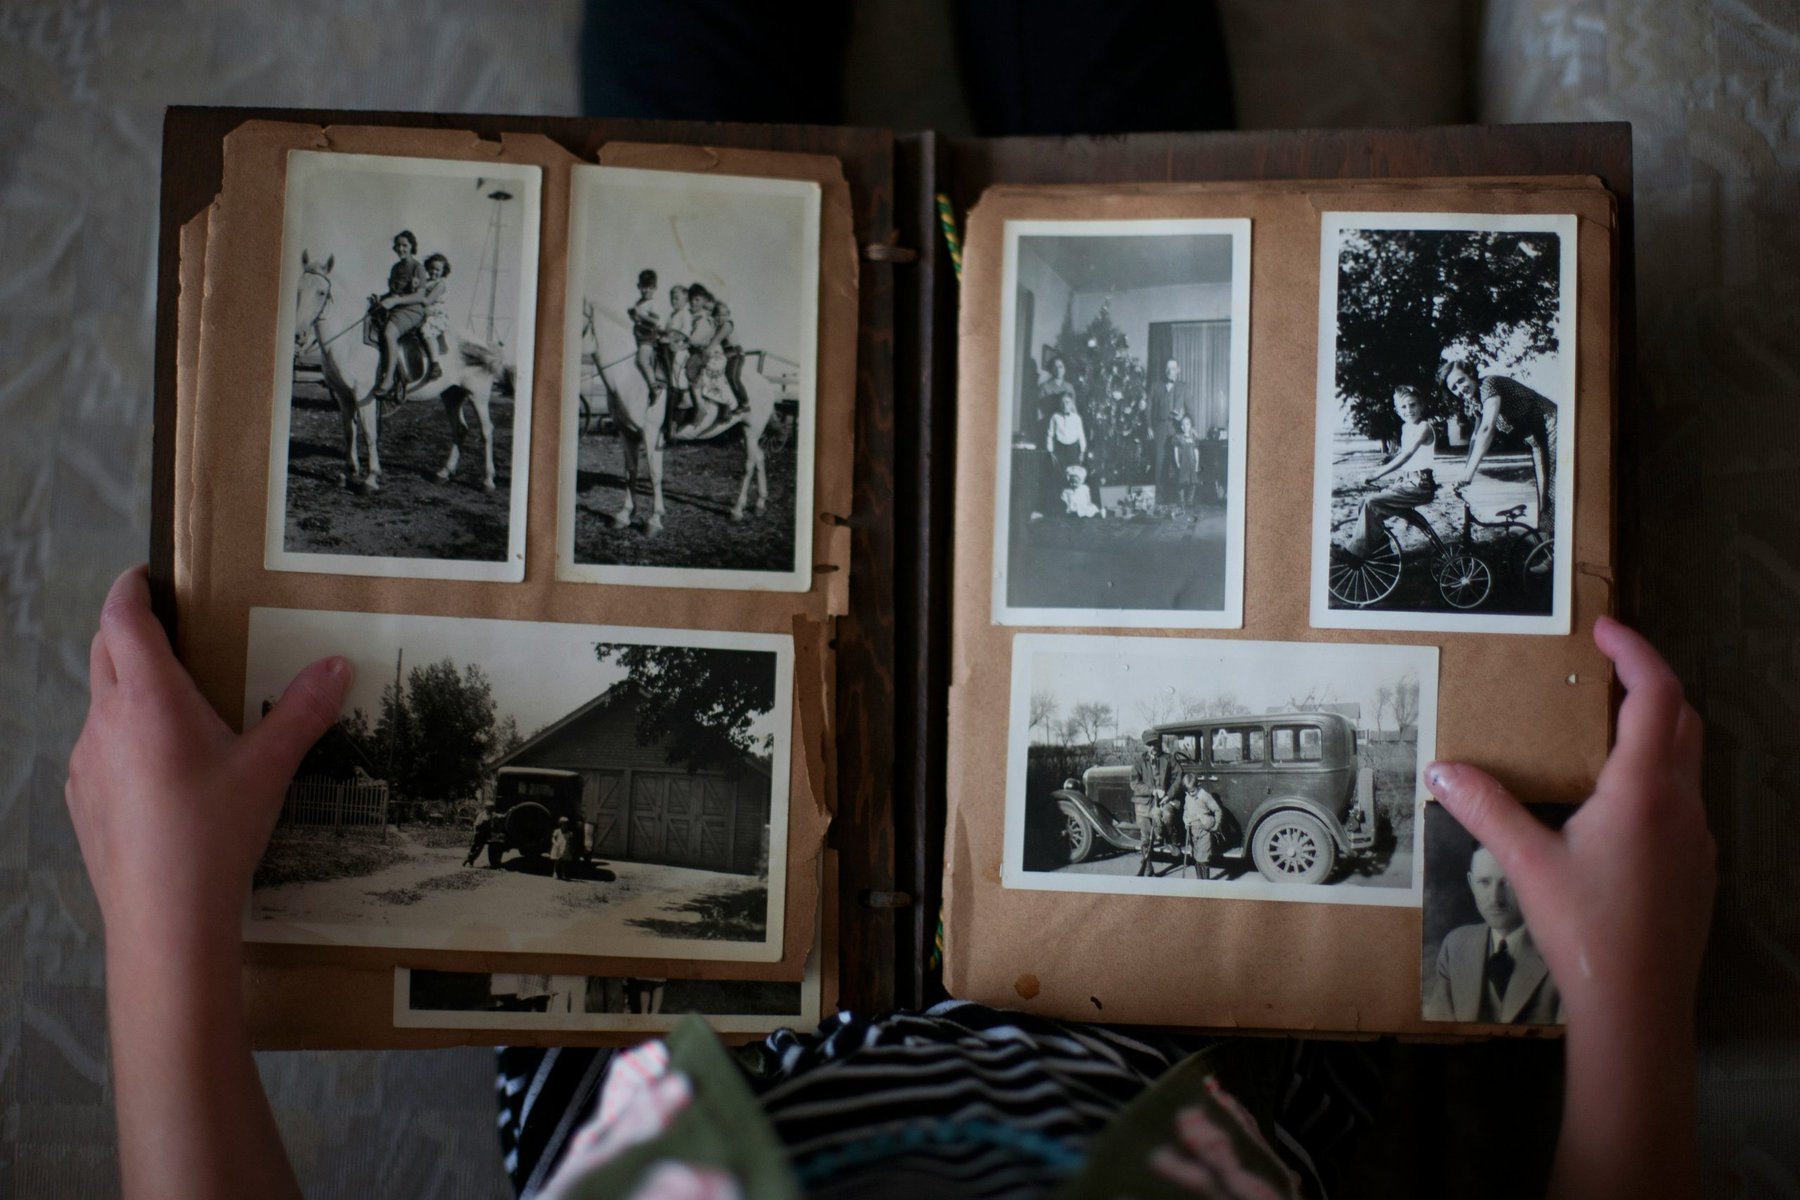 Collecting vintage photos, some of them may be family photos as well.